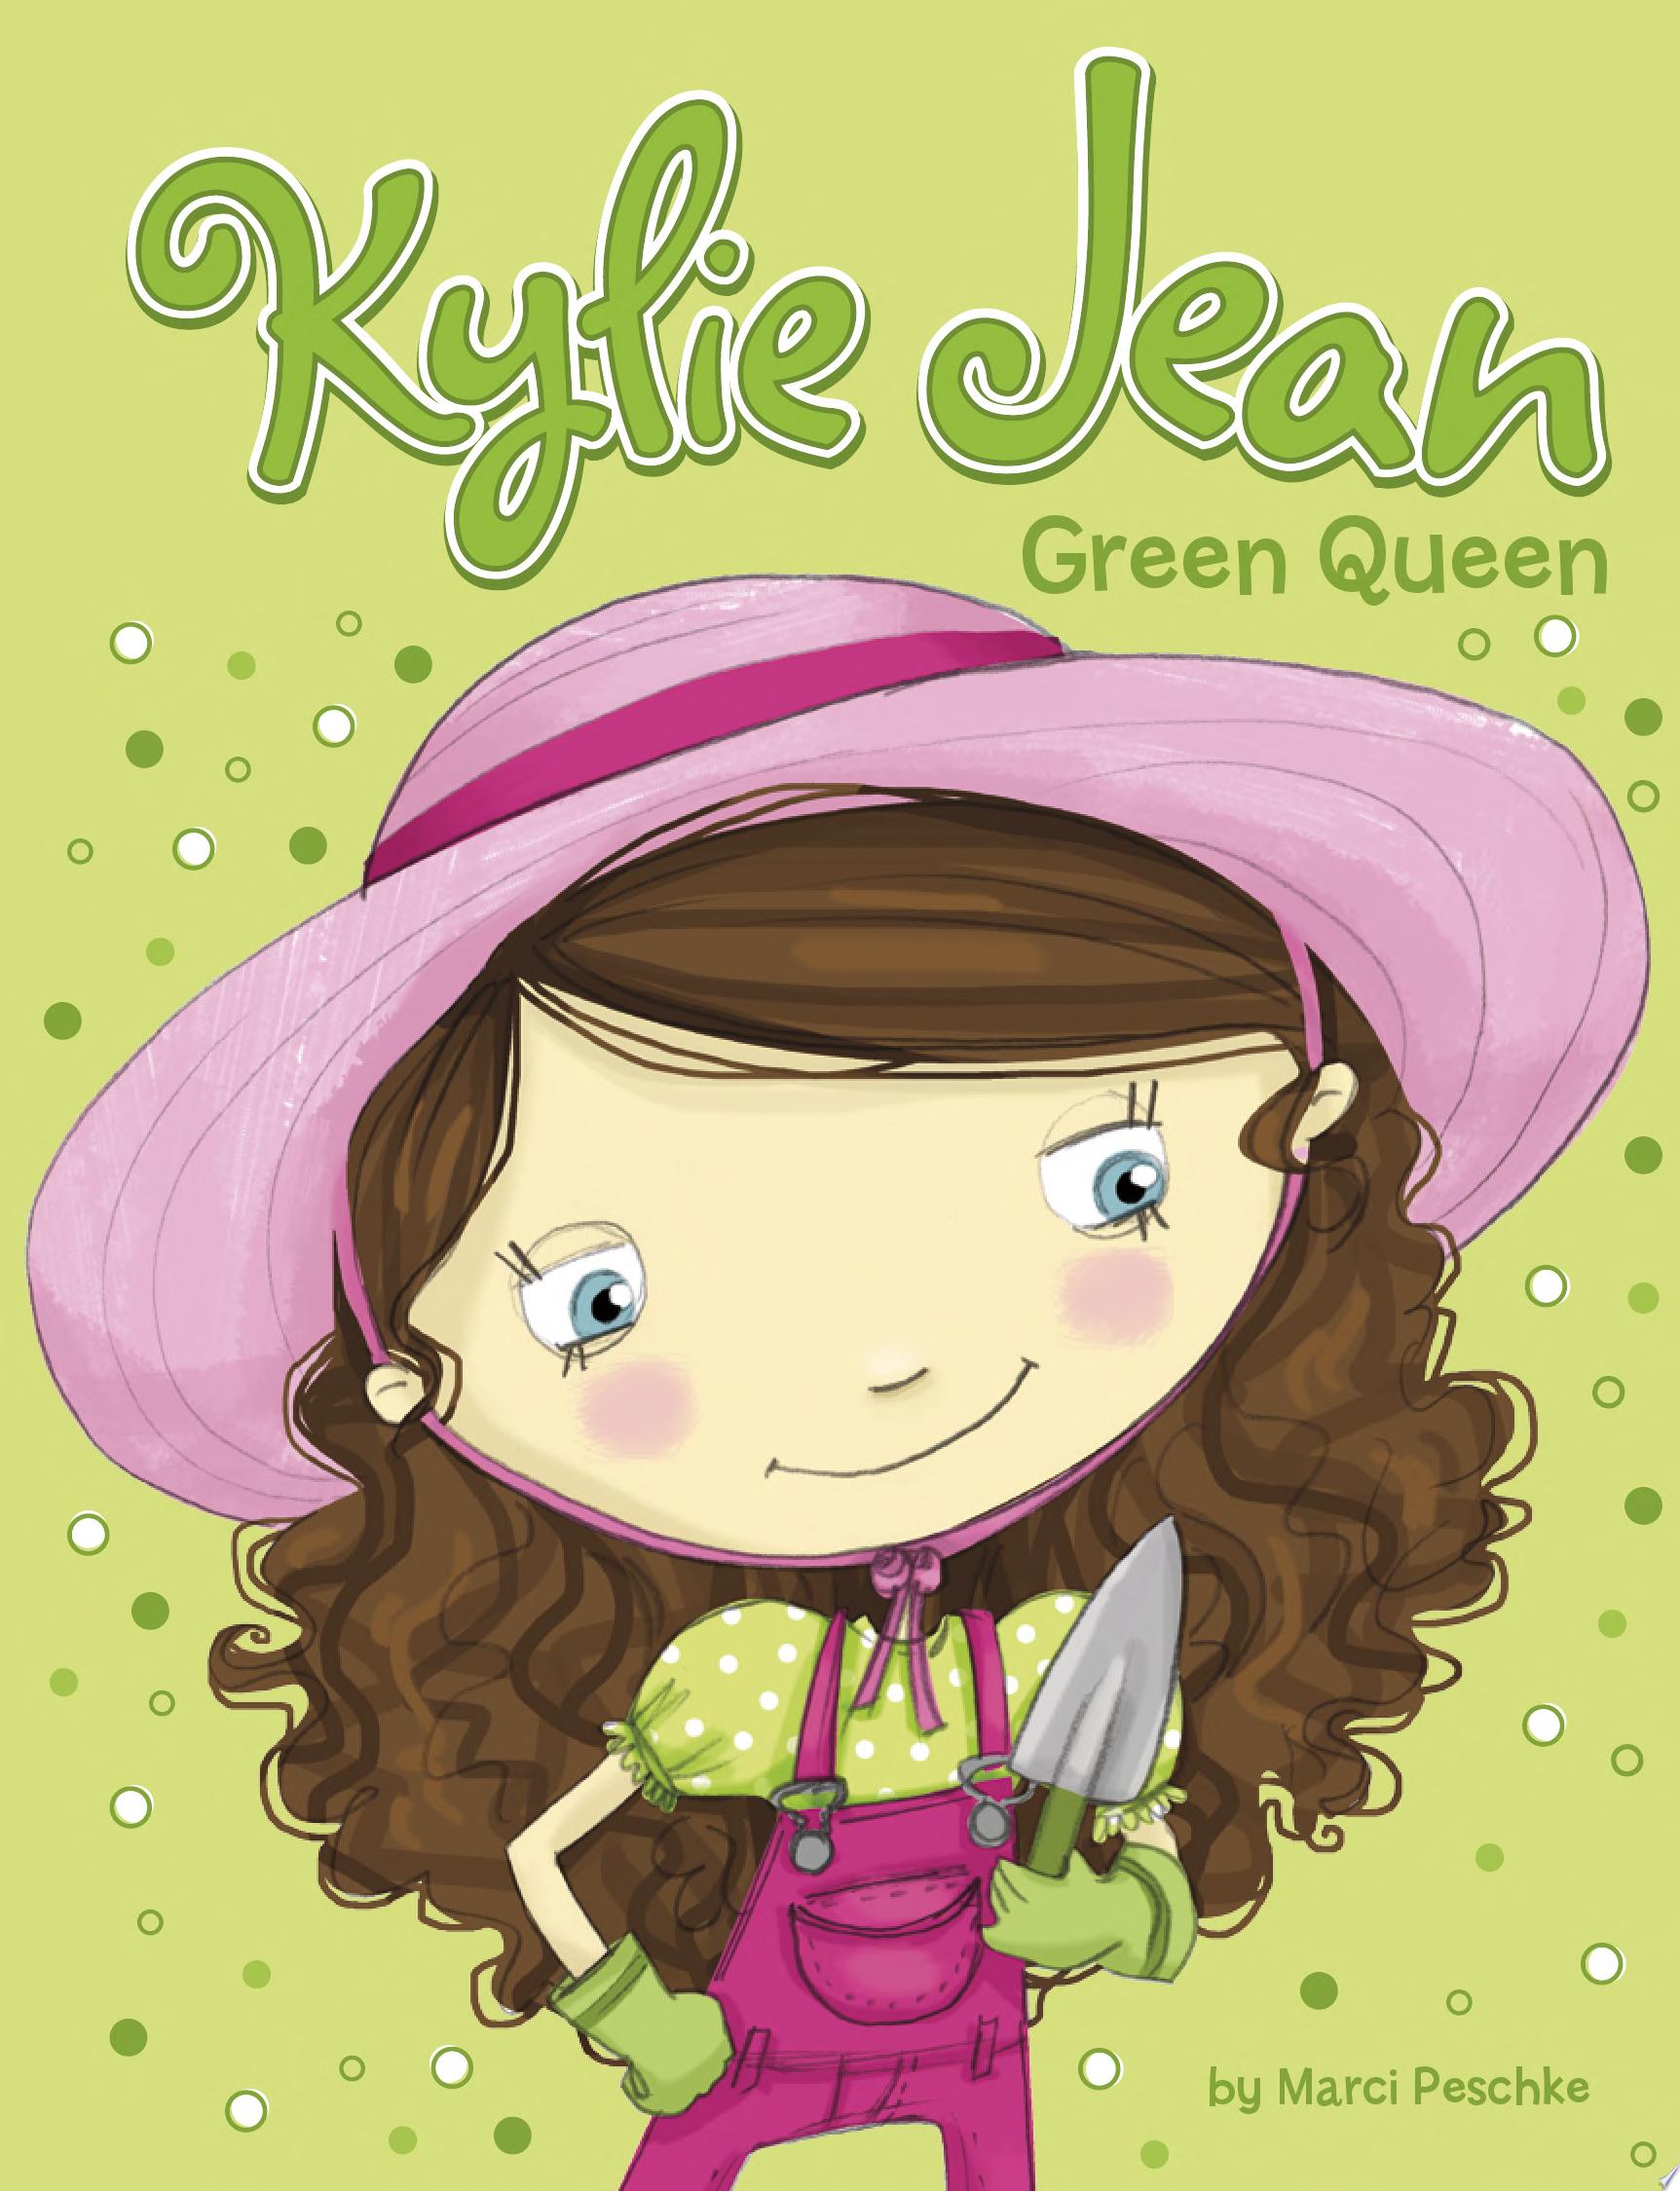 Image for "Green Queen"